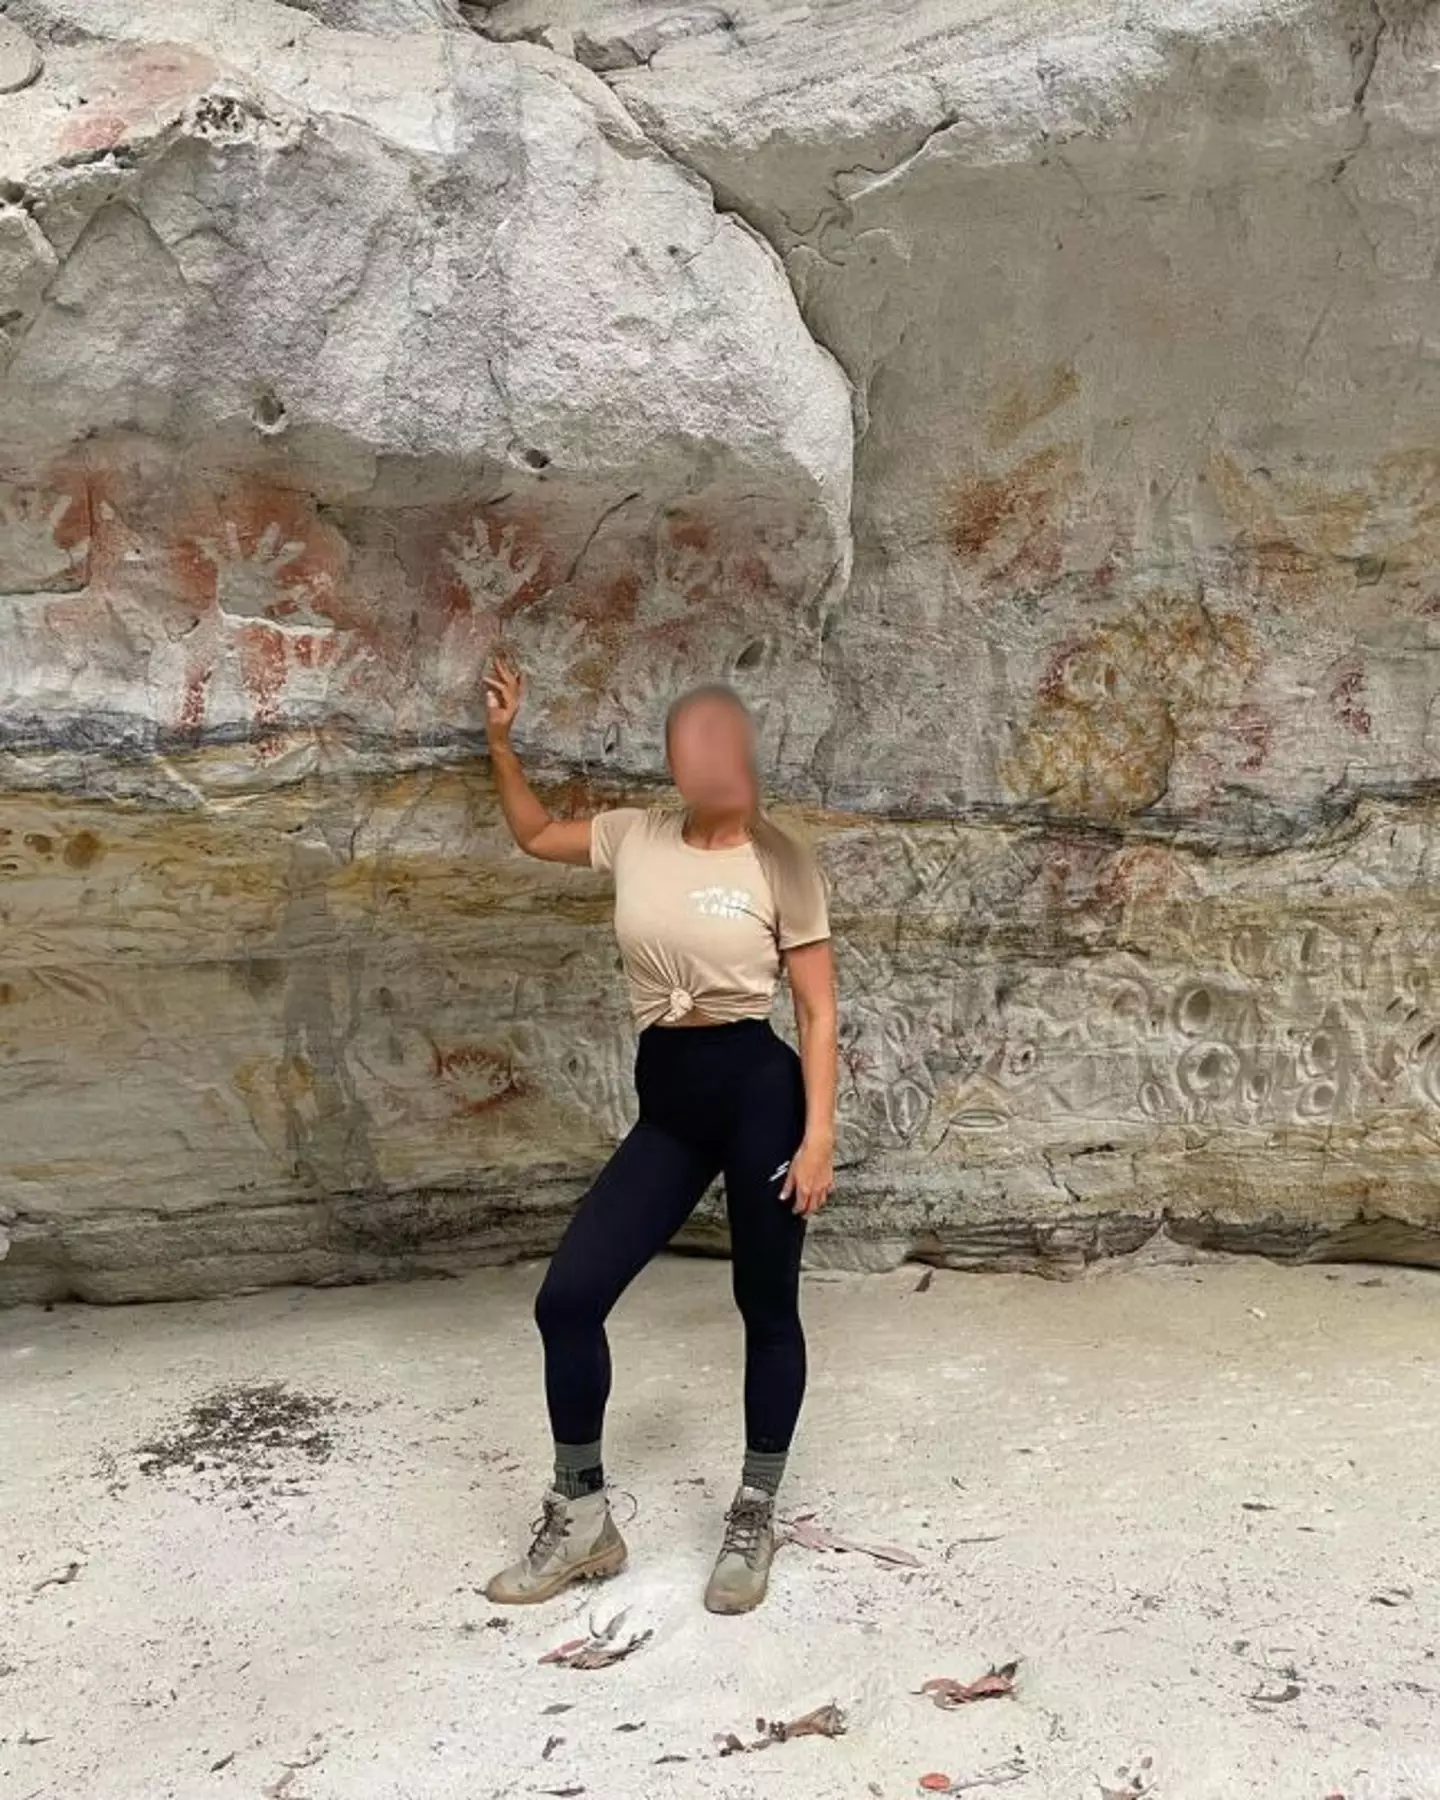 Australia park officials have slapped 'self-indulgent' influencers with hefty fines for committing 'disrespectful acts' around the rock art.